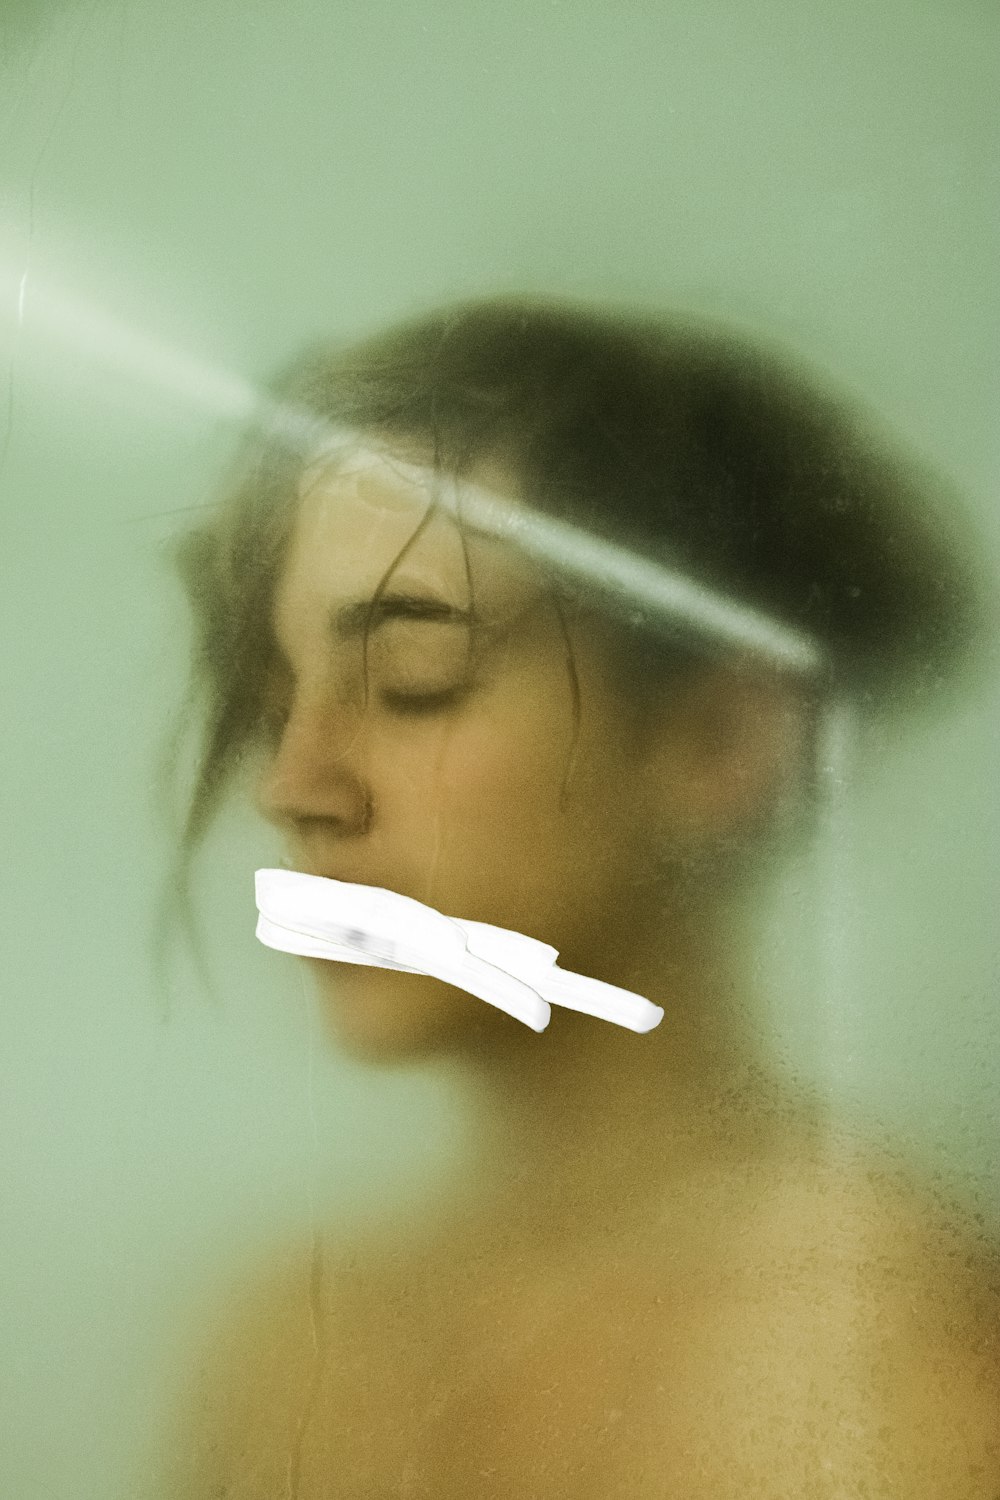 topless person taking bath in shower